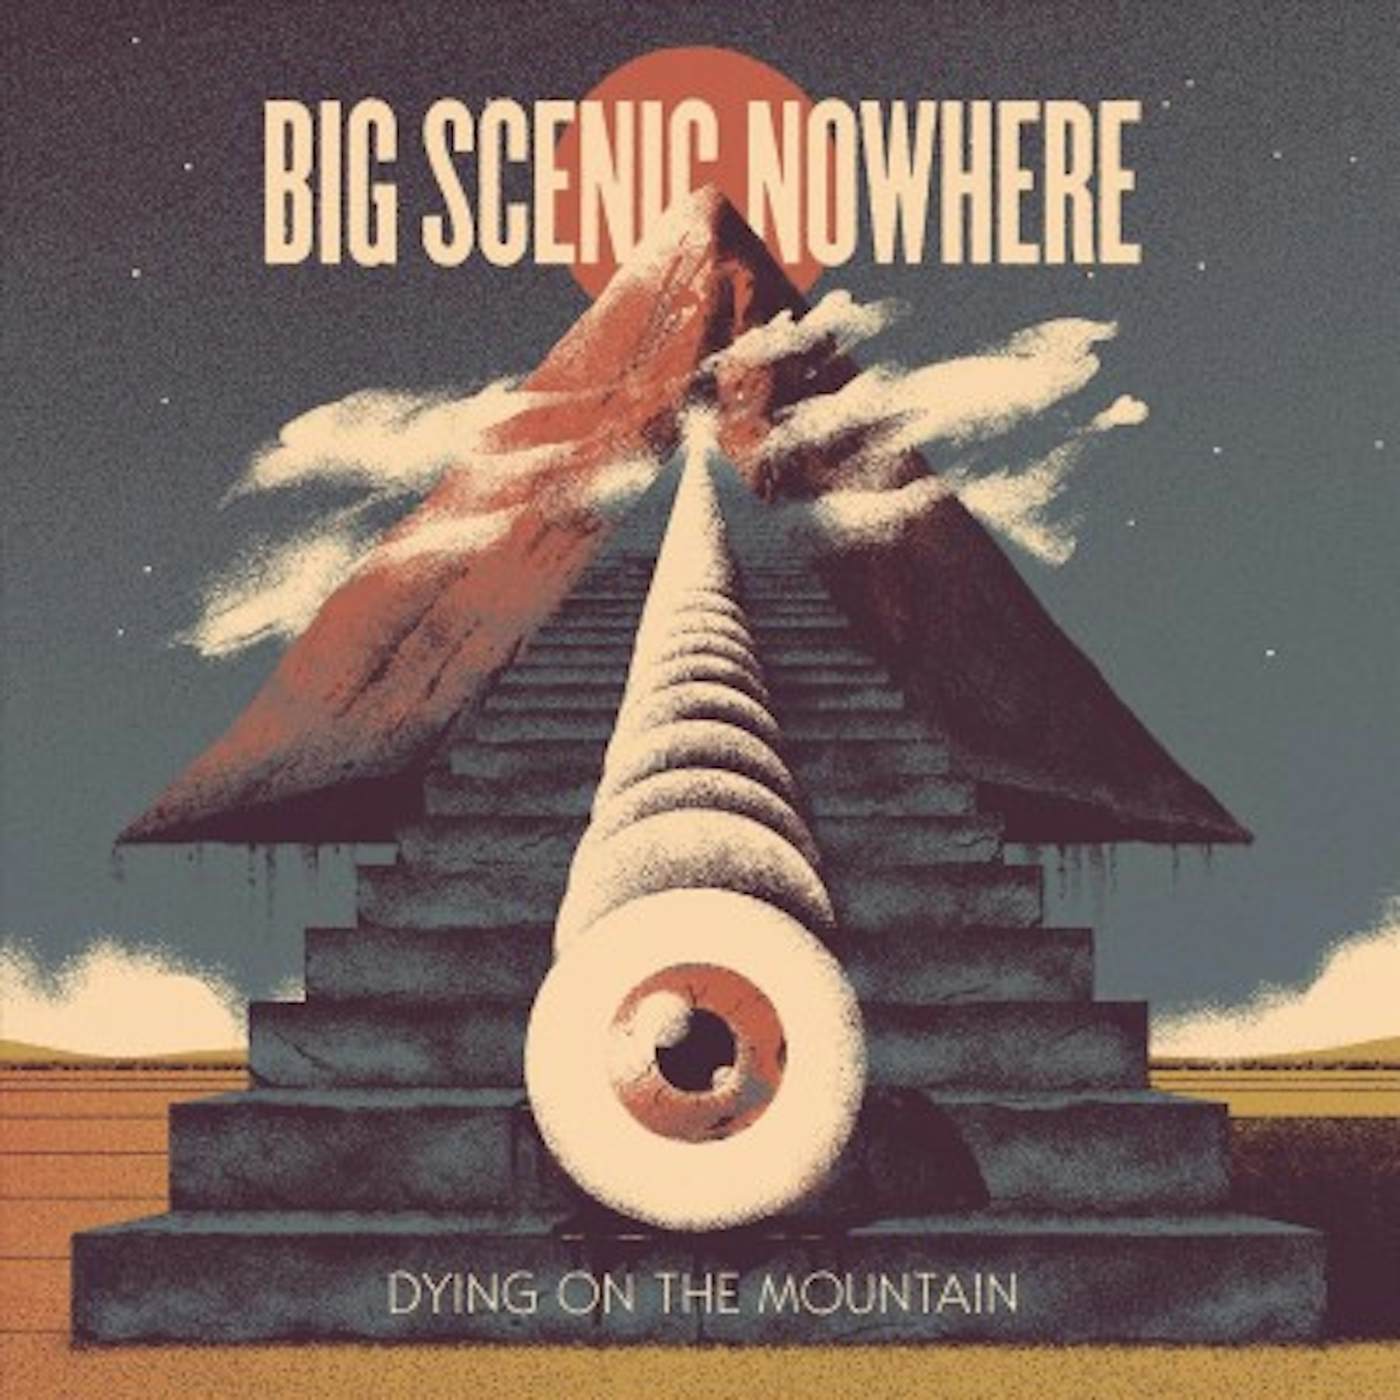 Big Scenic Nowhere Dying On The Mountain Vinyl Record